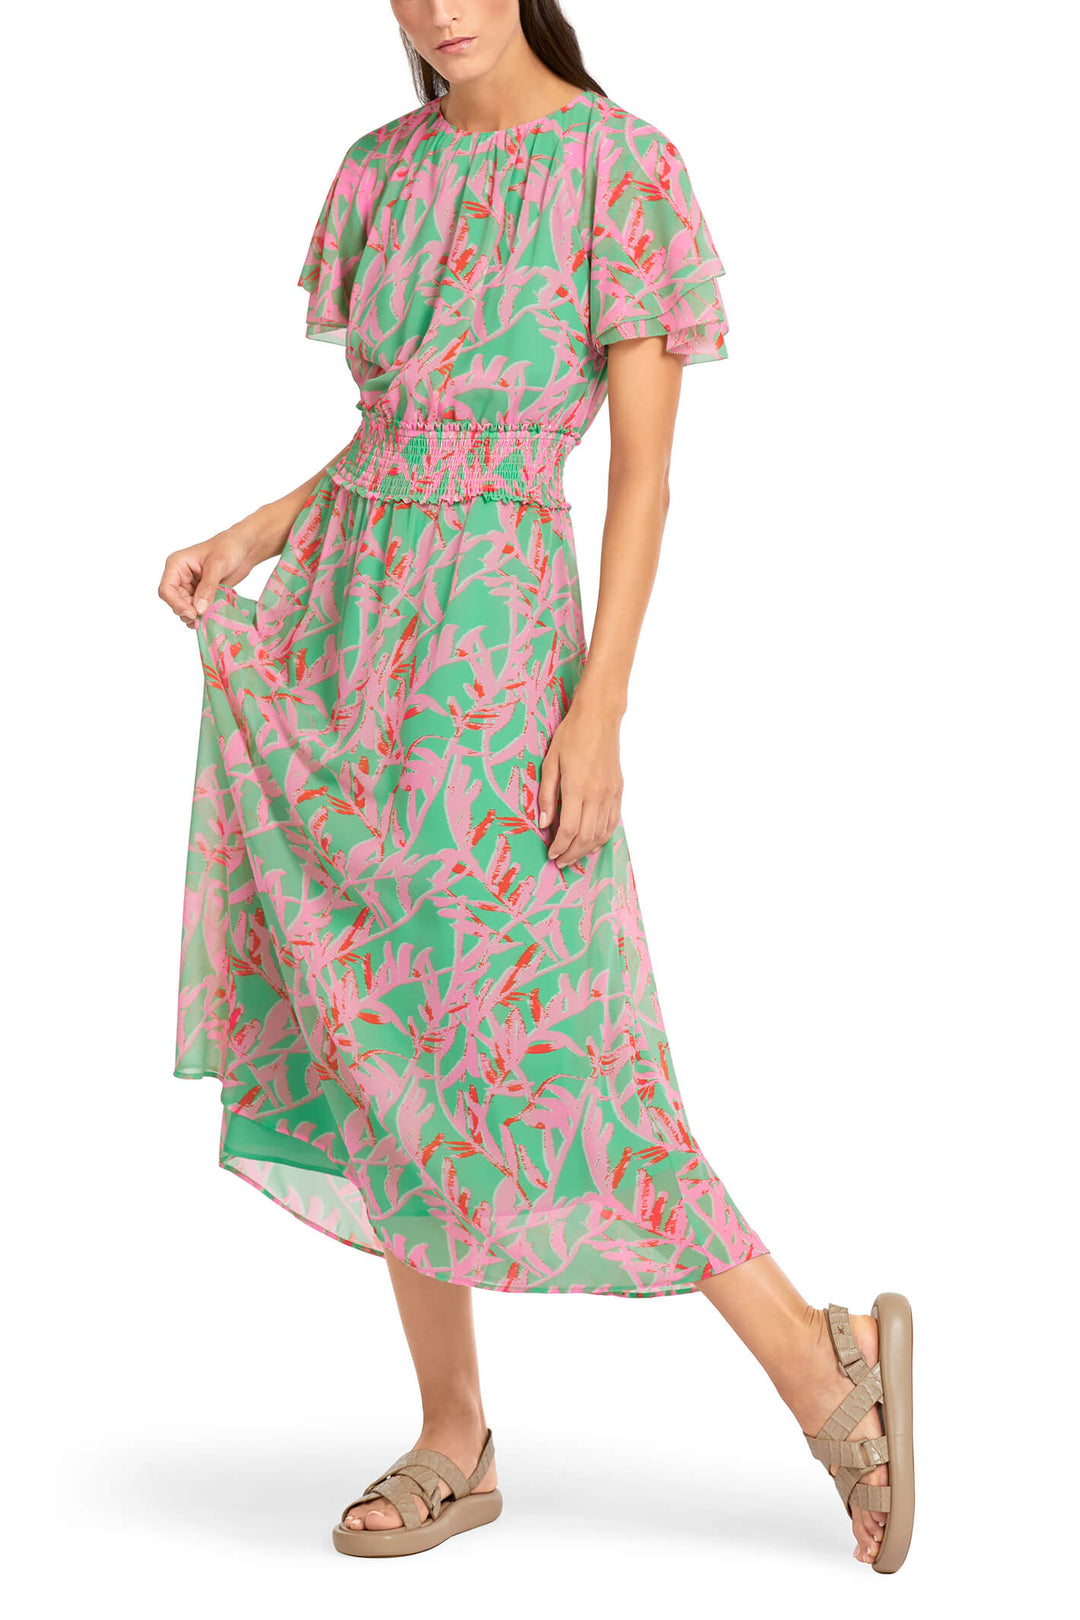 Marc Cain Collection UC 21.09 W43 Bright Jade Green Print Dress - Olivia Grace Fashion